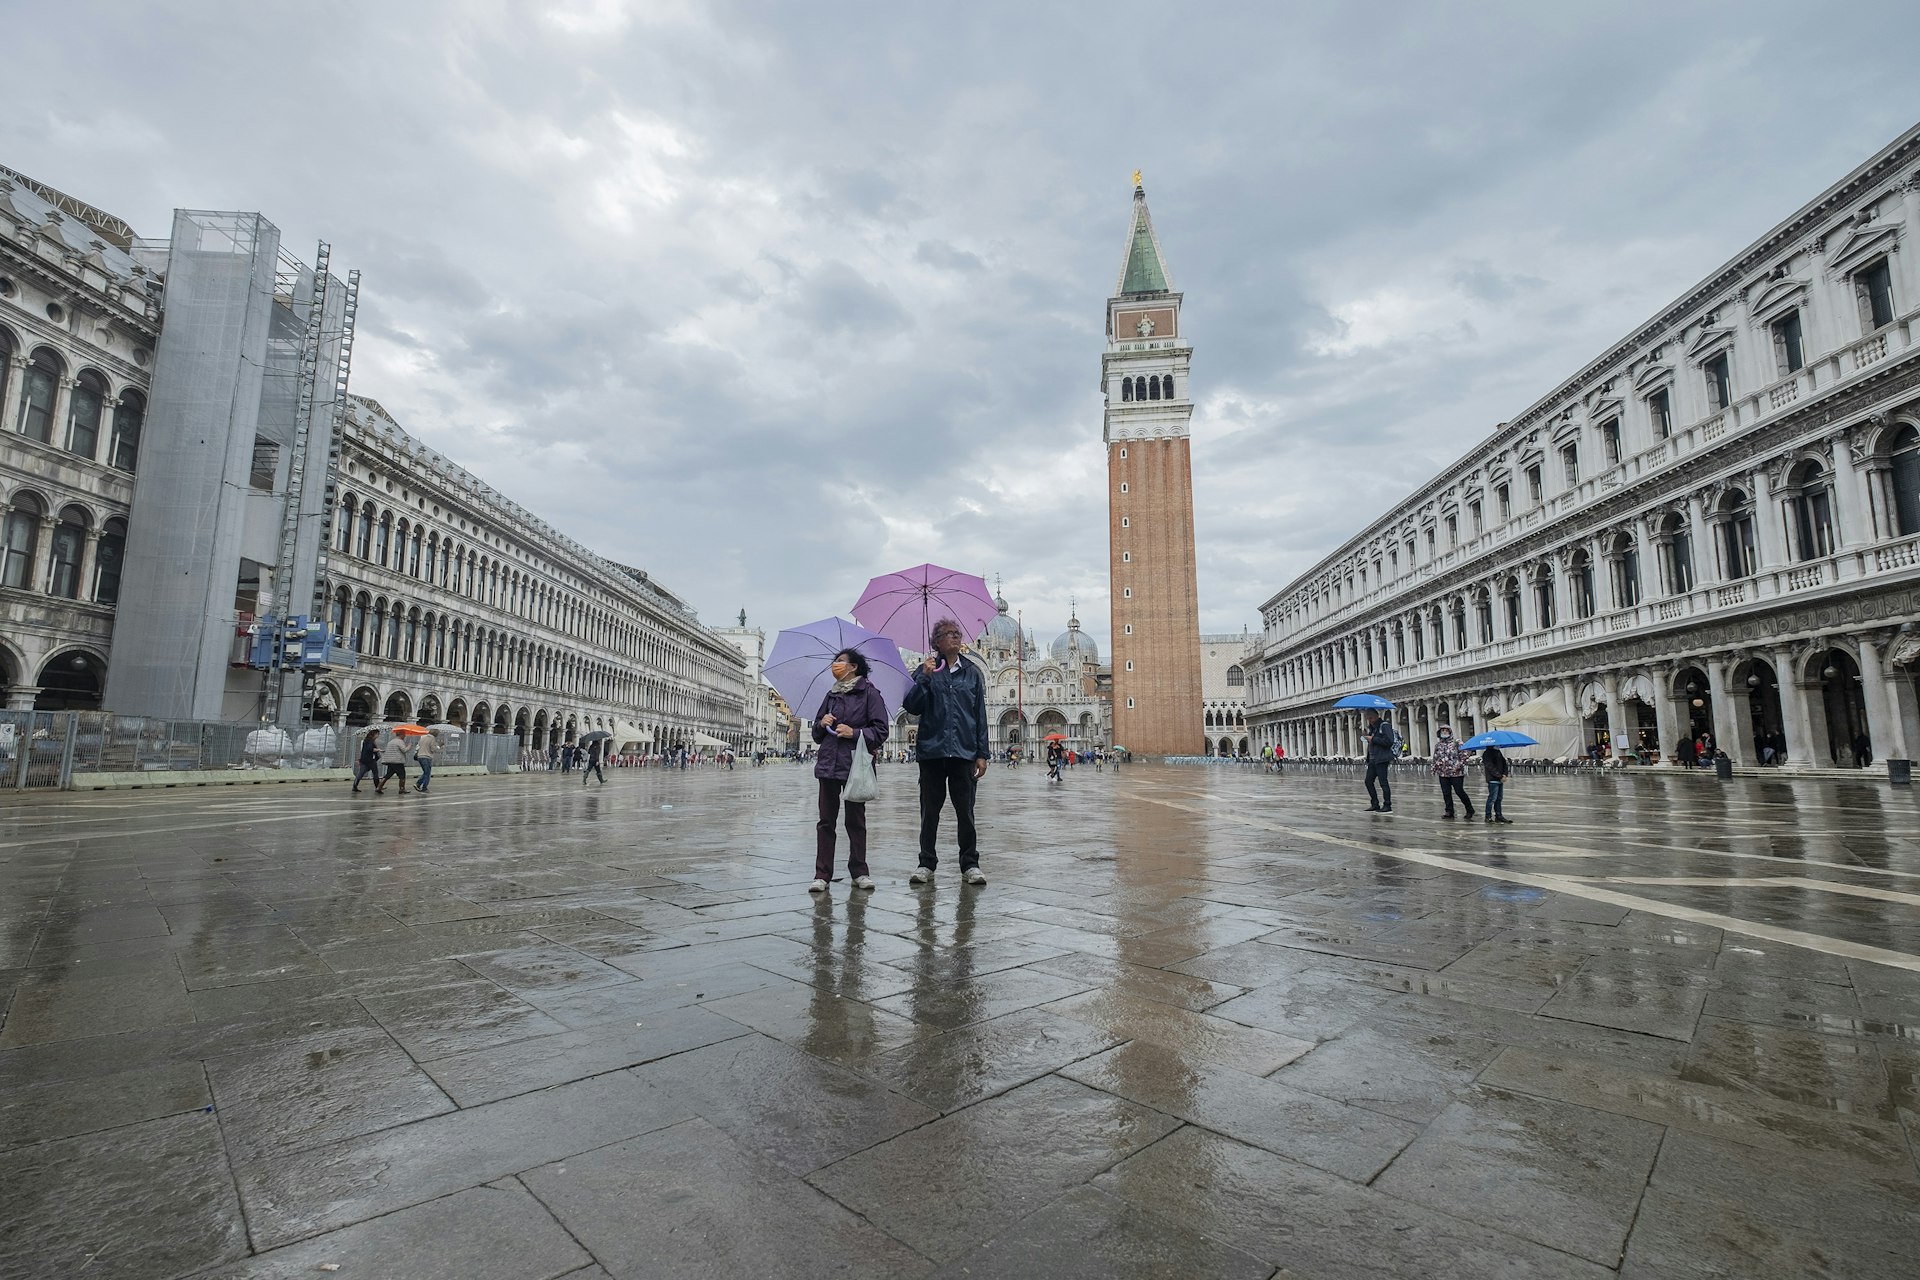 A picture of a dry Saint Mark's Square during high tide